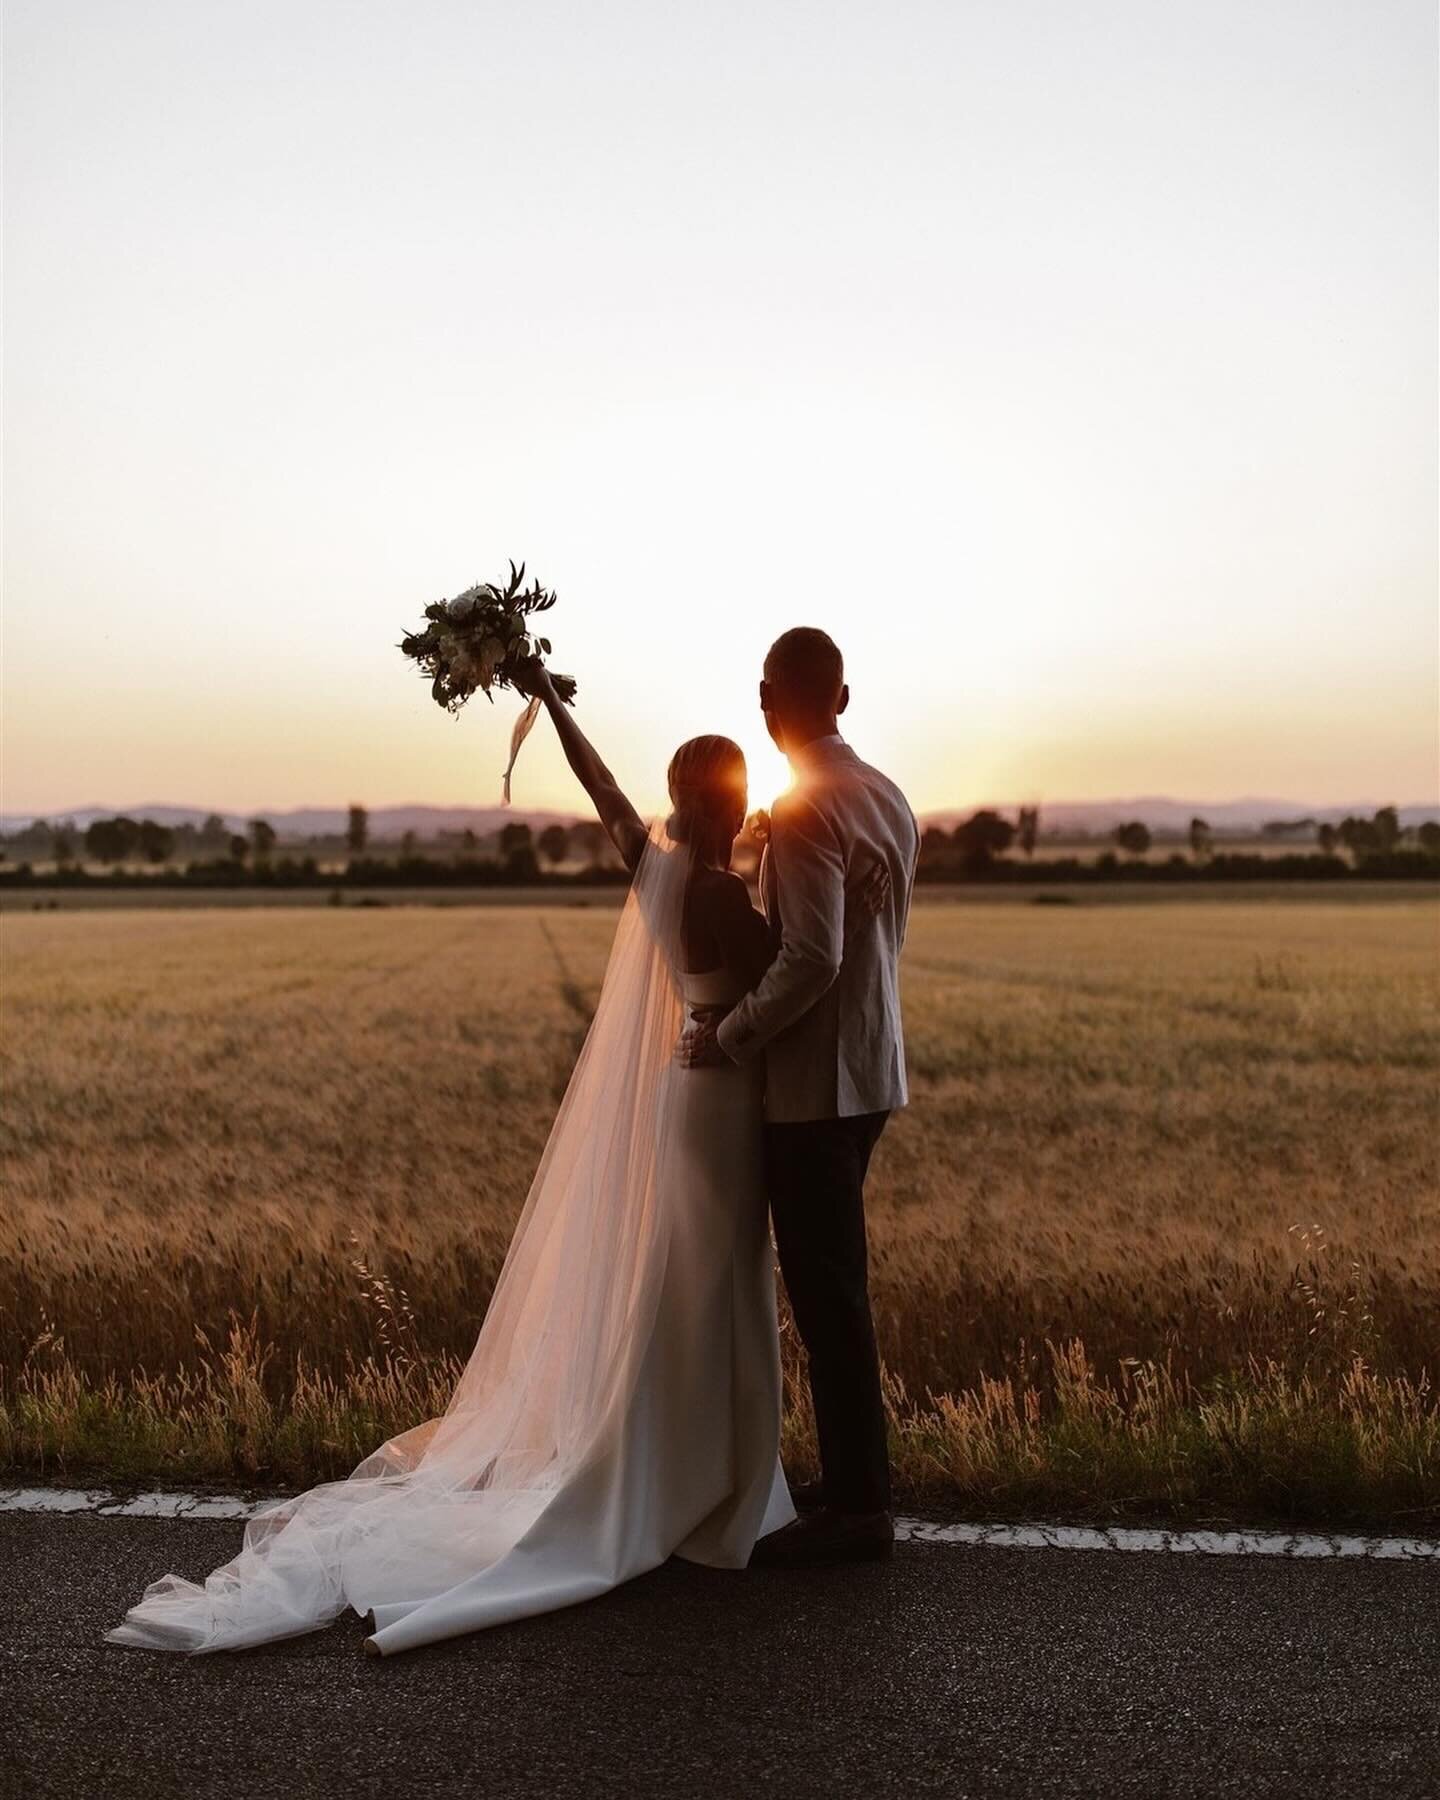 Hopsakee, there they are again: blog vibes! That flow can sometimes just overwhelm you. Before you know it, the first wedding of the year is upon us - yes, next week already - in bustling Amsterdam. With the blogs we immerse ourselves in the coming